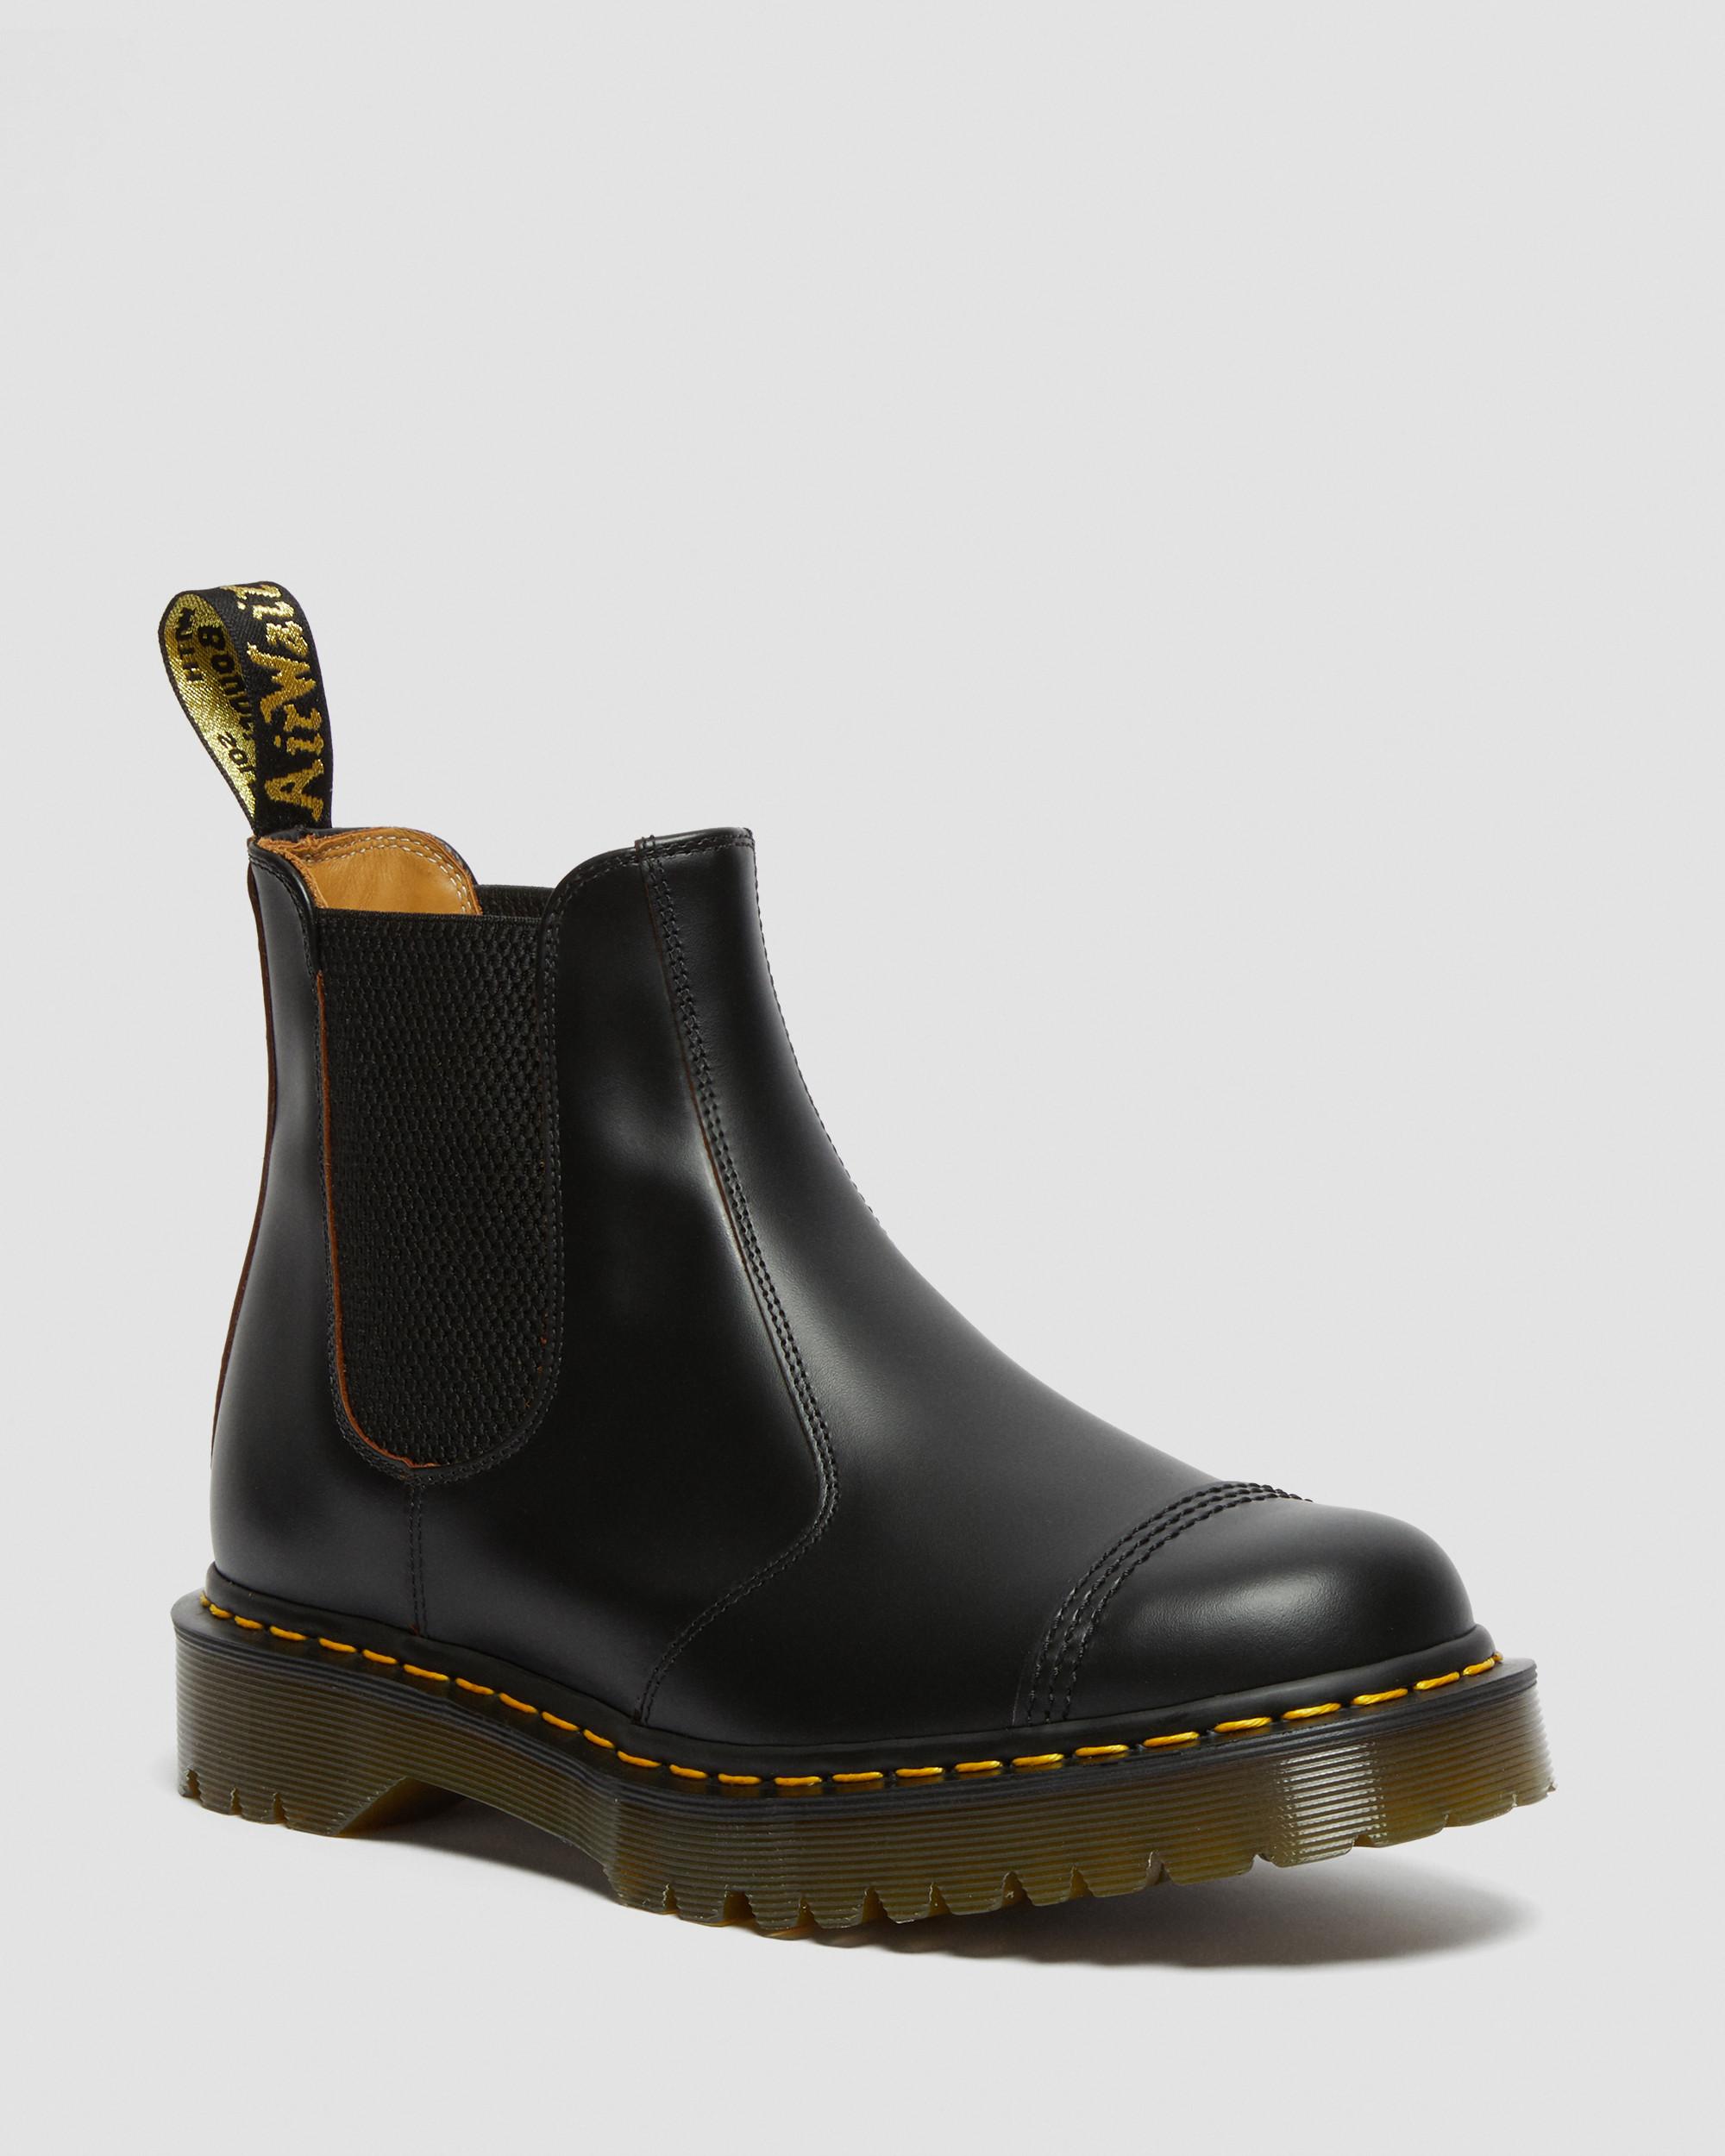 2976 Bex Made in England Toe Cap Chelsea Boots, Black | Dr. Martens